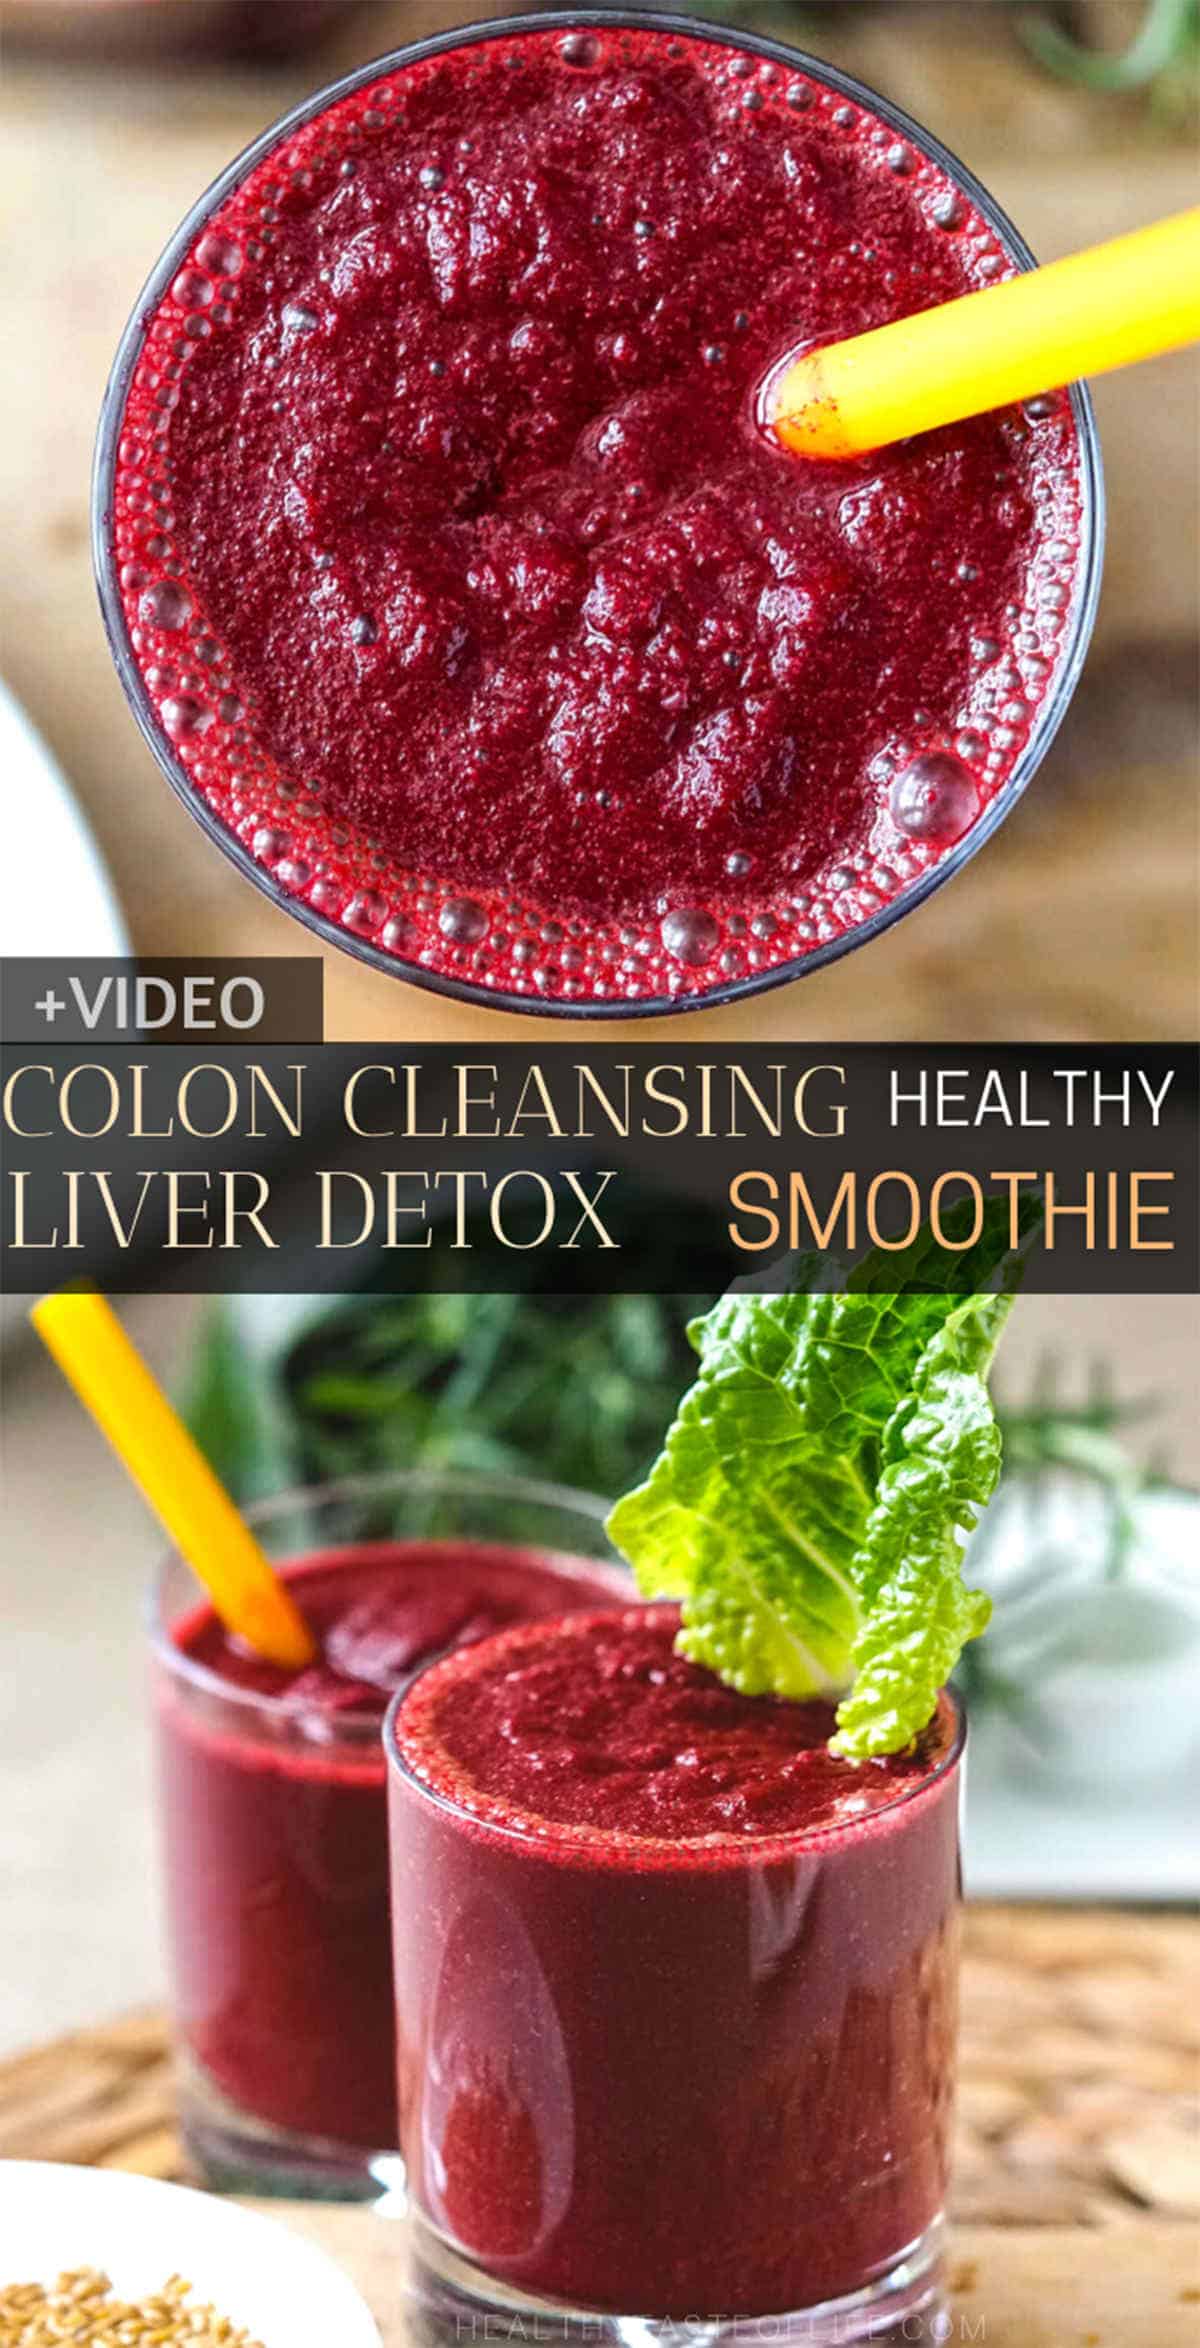 The best natural colon cleanse and liver detox smoothie recipe: great for cleansing your colon, to regulate high blood pressure, relieve constipation and bloating. A simple colon and liver detox drink with anti-inflammatory and immune boosting properties using ingredients like beets, carrots, apple, ginger and greens based on food combining rules. #detox #healthysmoothie #detoxsmoothies #detoxsmoothie #immuneboosting #liverdetoxsmoothie #antiinflammatorysmoothie #beetsmoothierecipe
